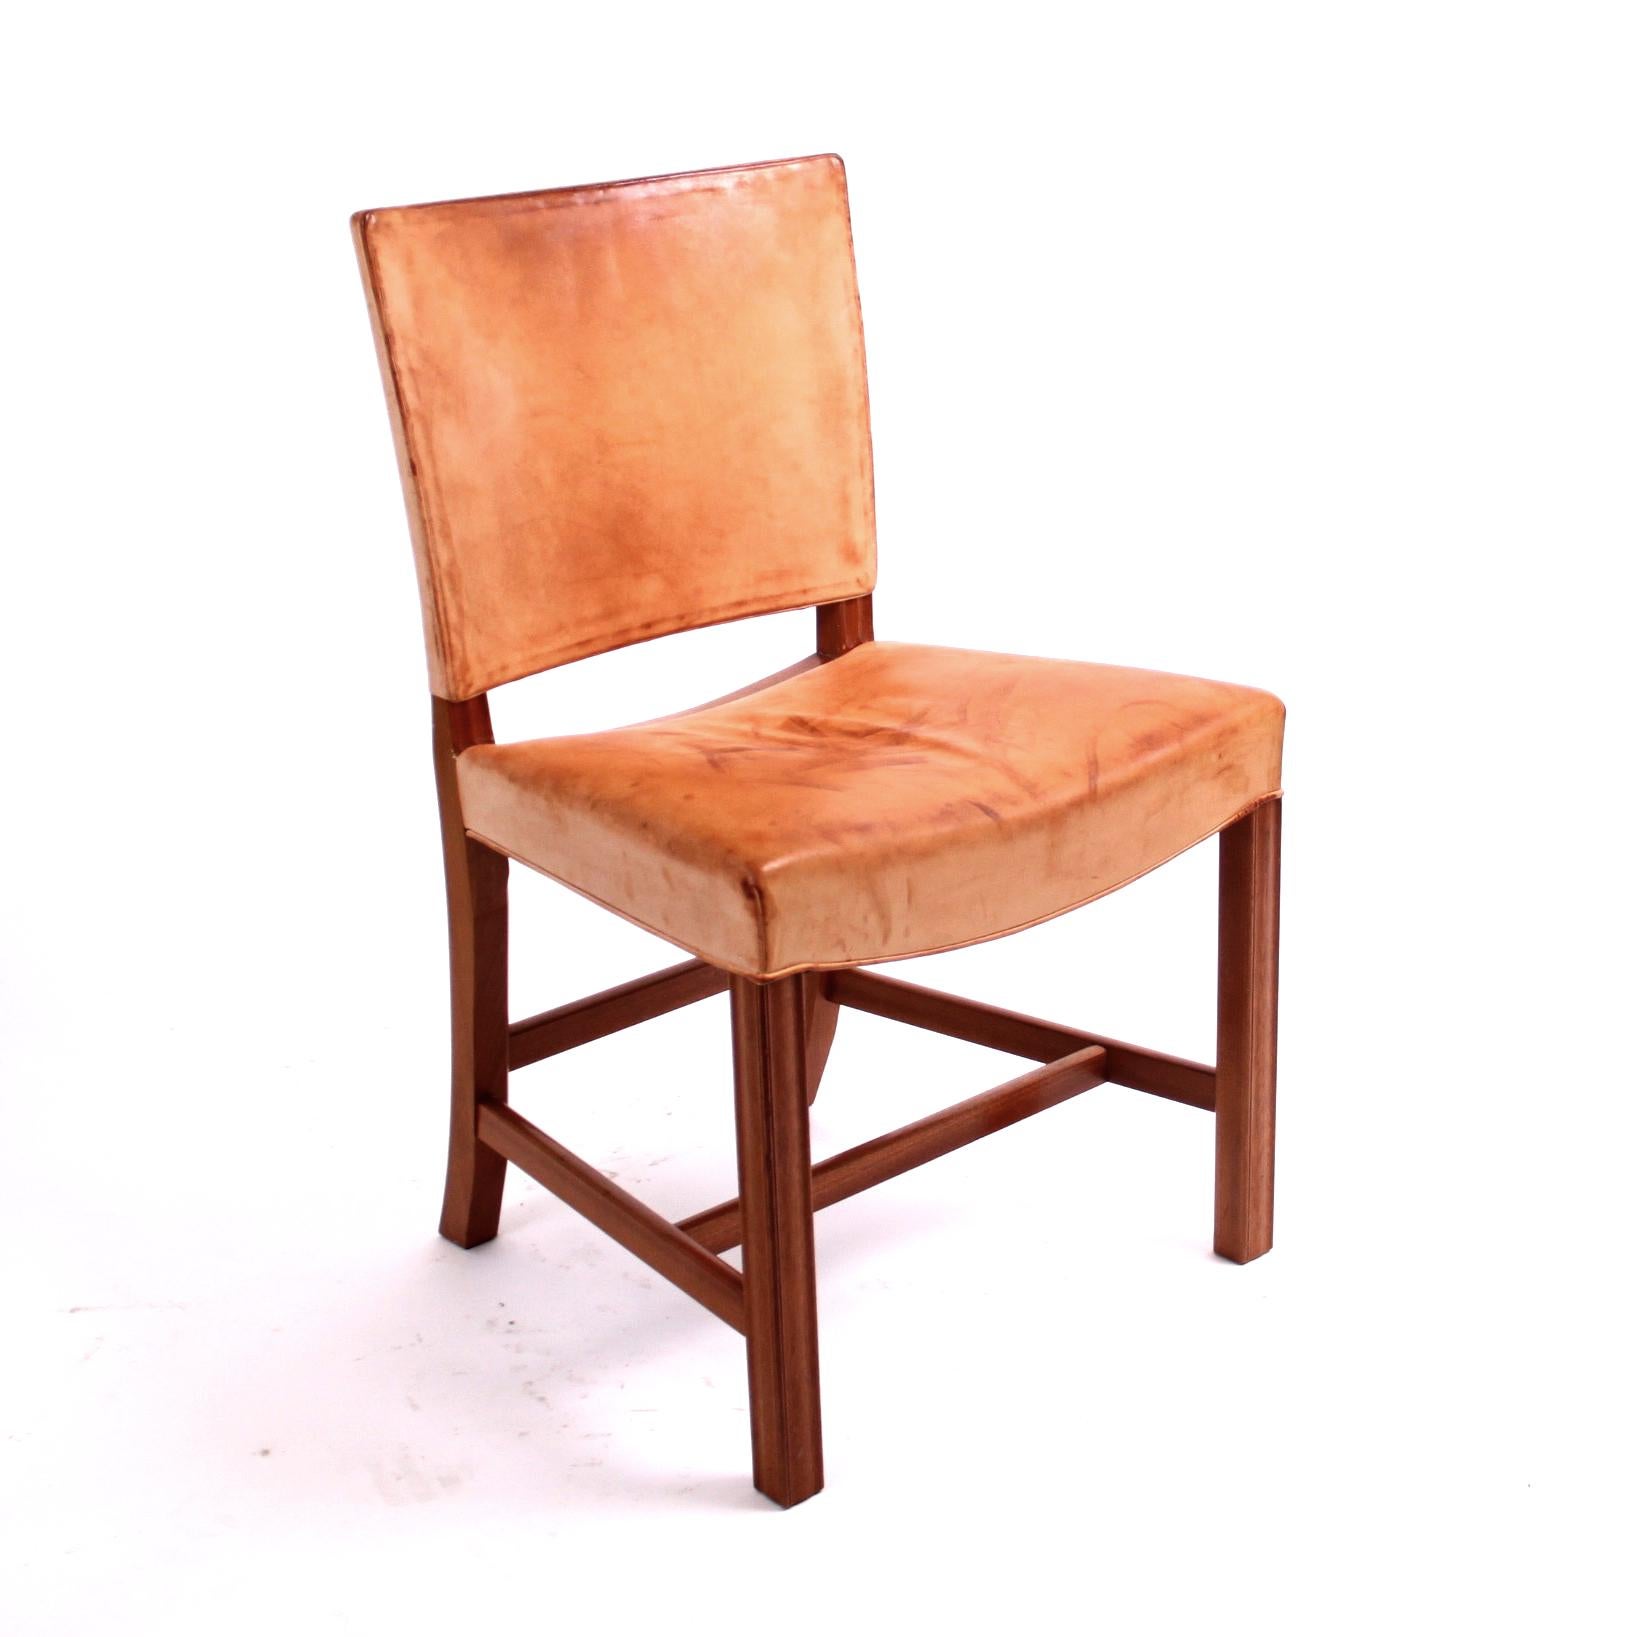 Danish Kaare Klint “Red Chair” in Patinated Natural Leather with Piping